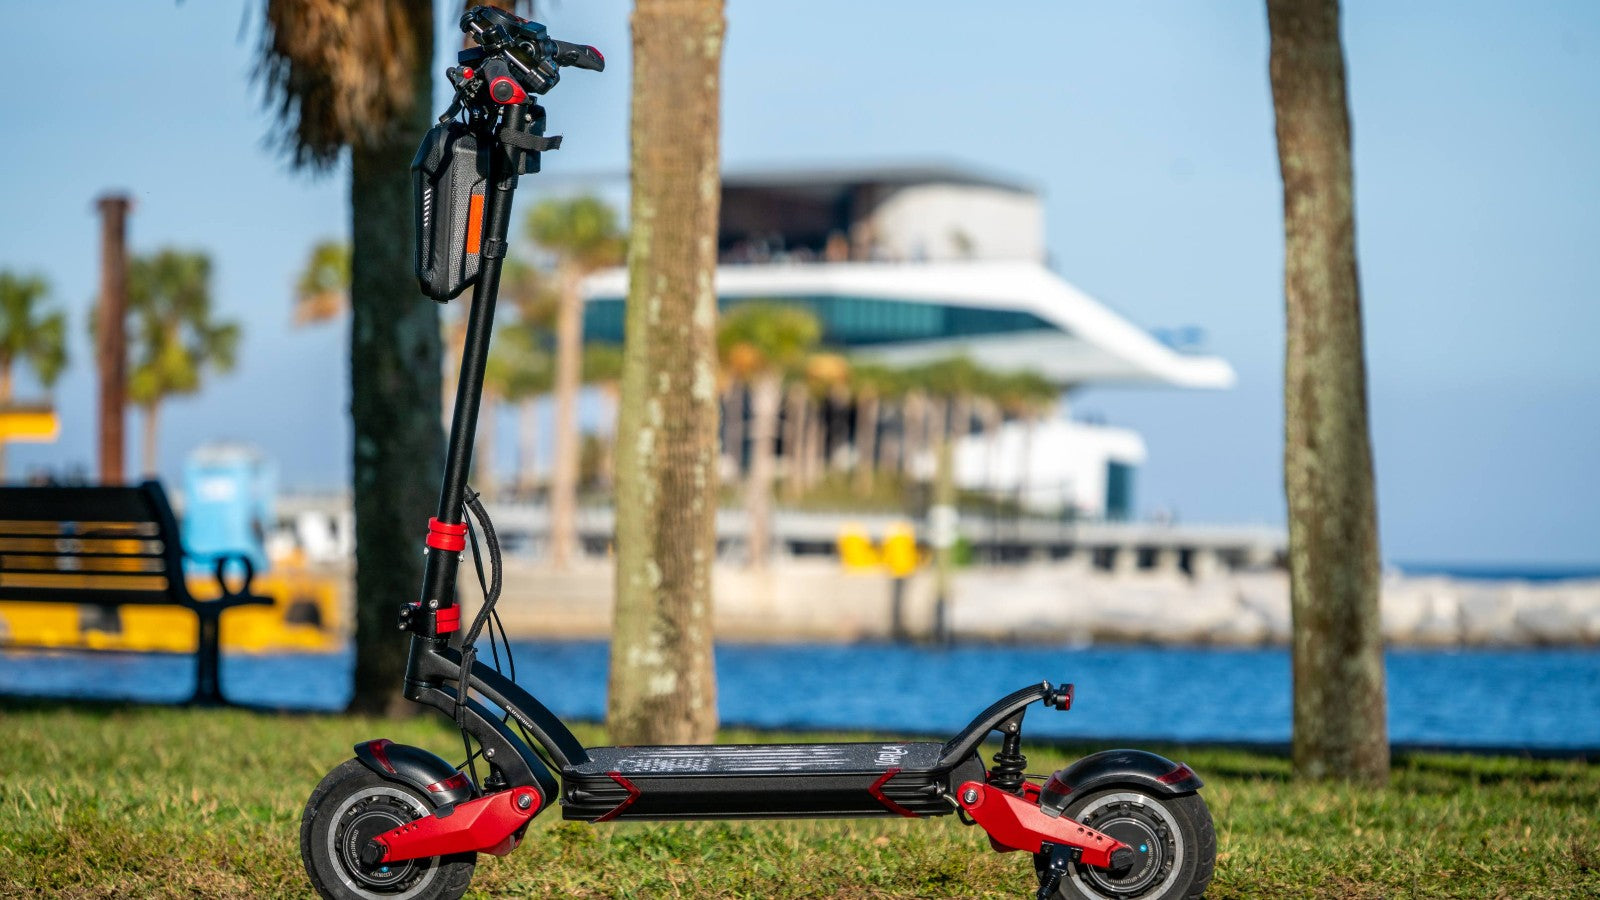 Varla electric scooter for adults